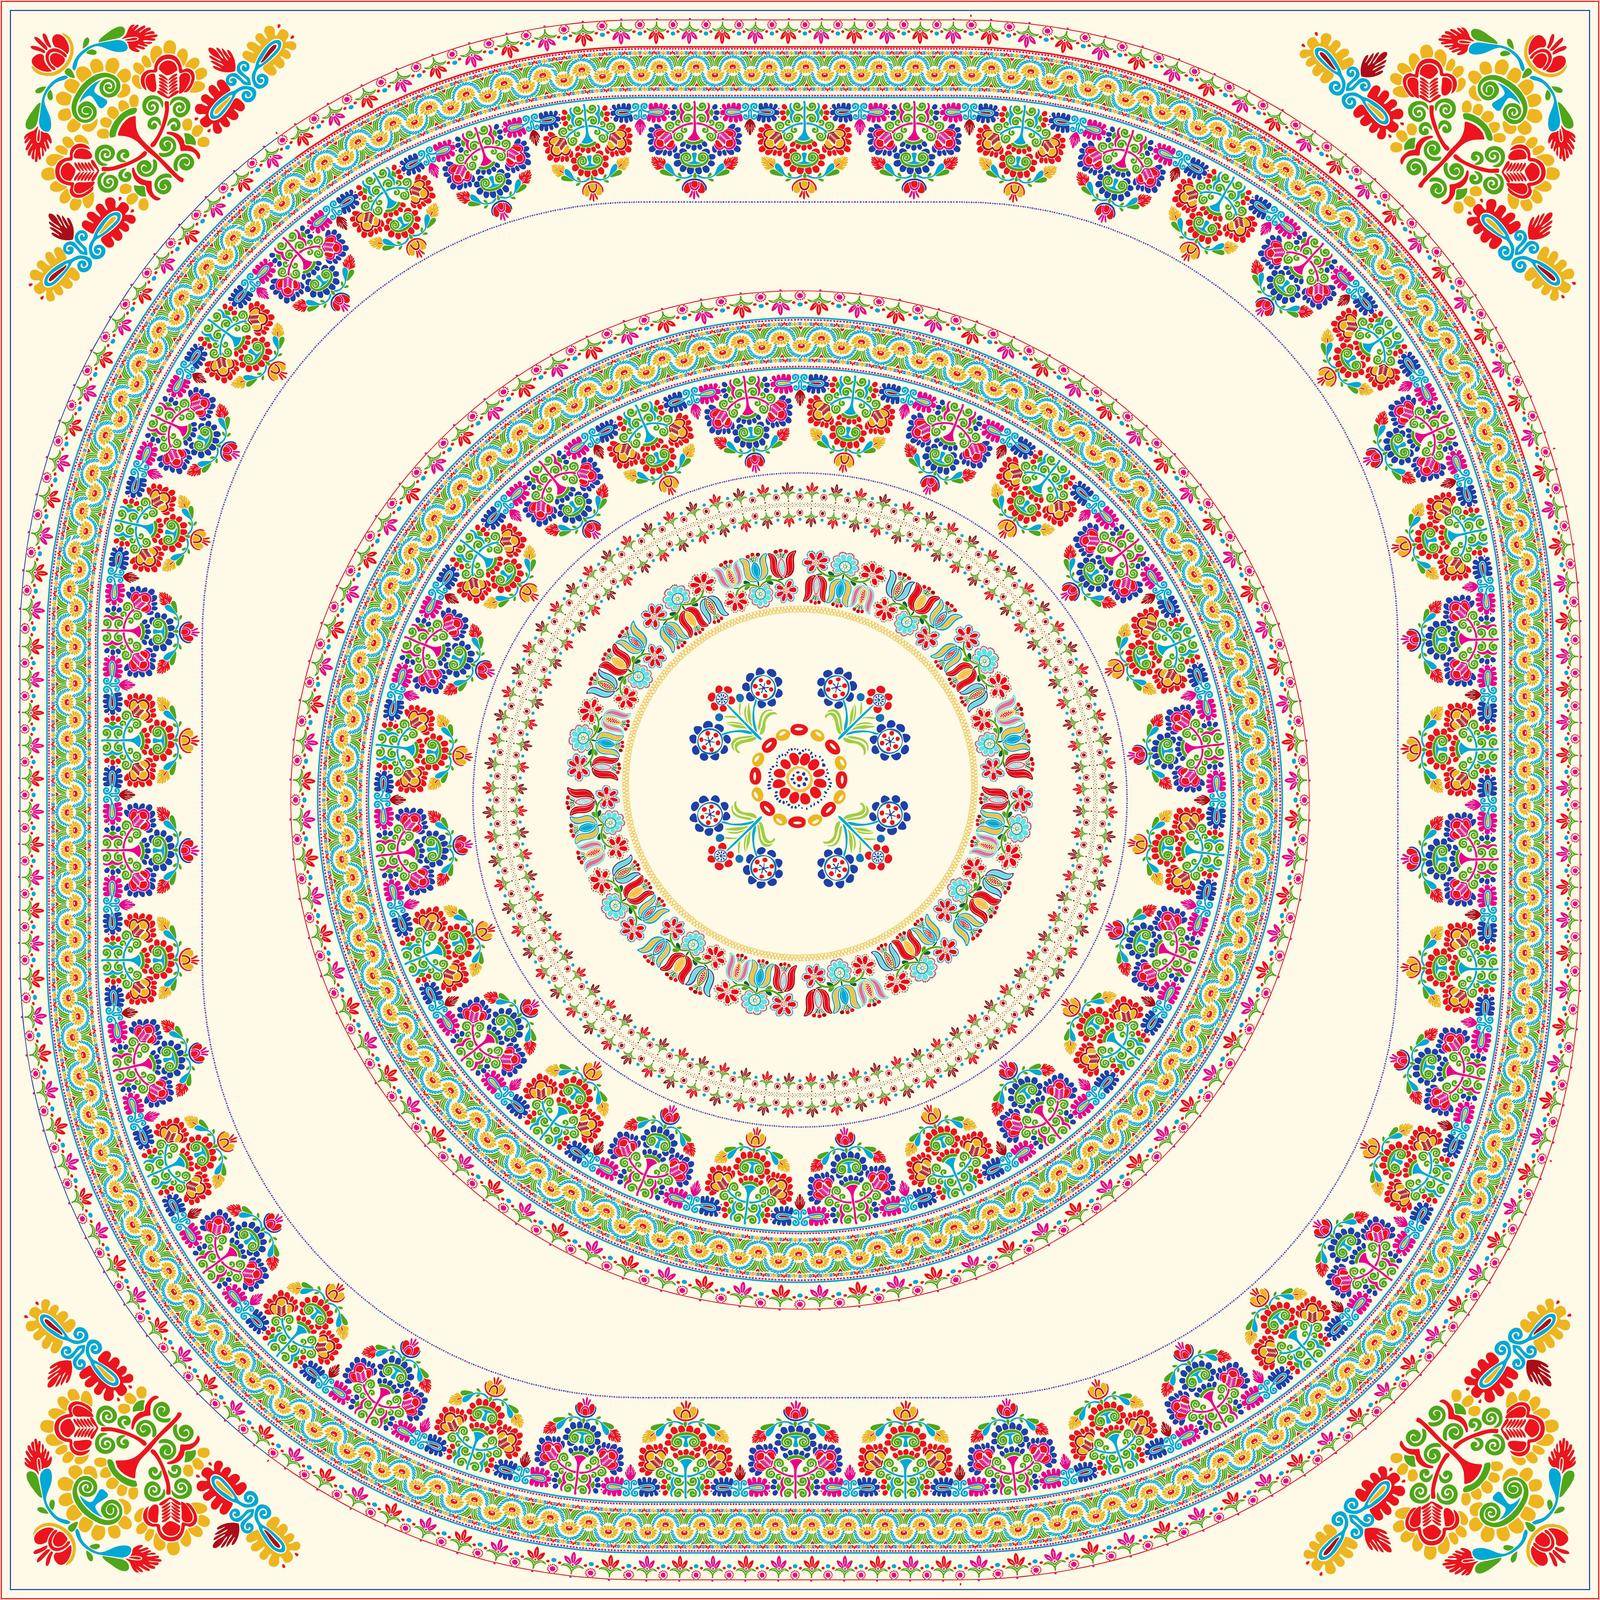 Hungarian tile. Decorative background inspired by traditional Hungarian embroidery.